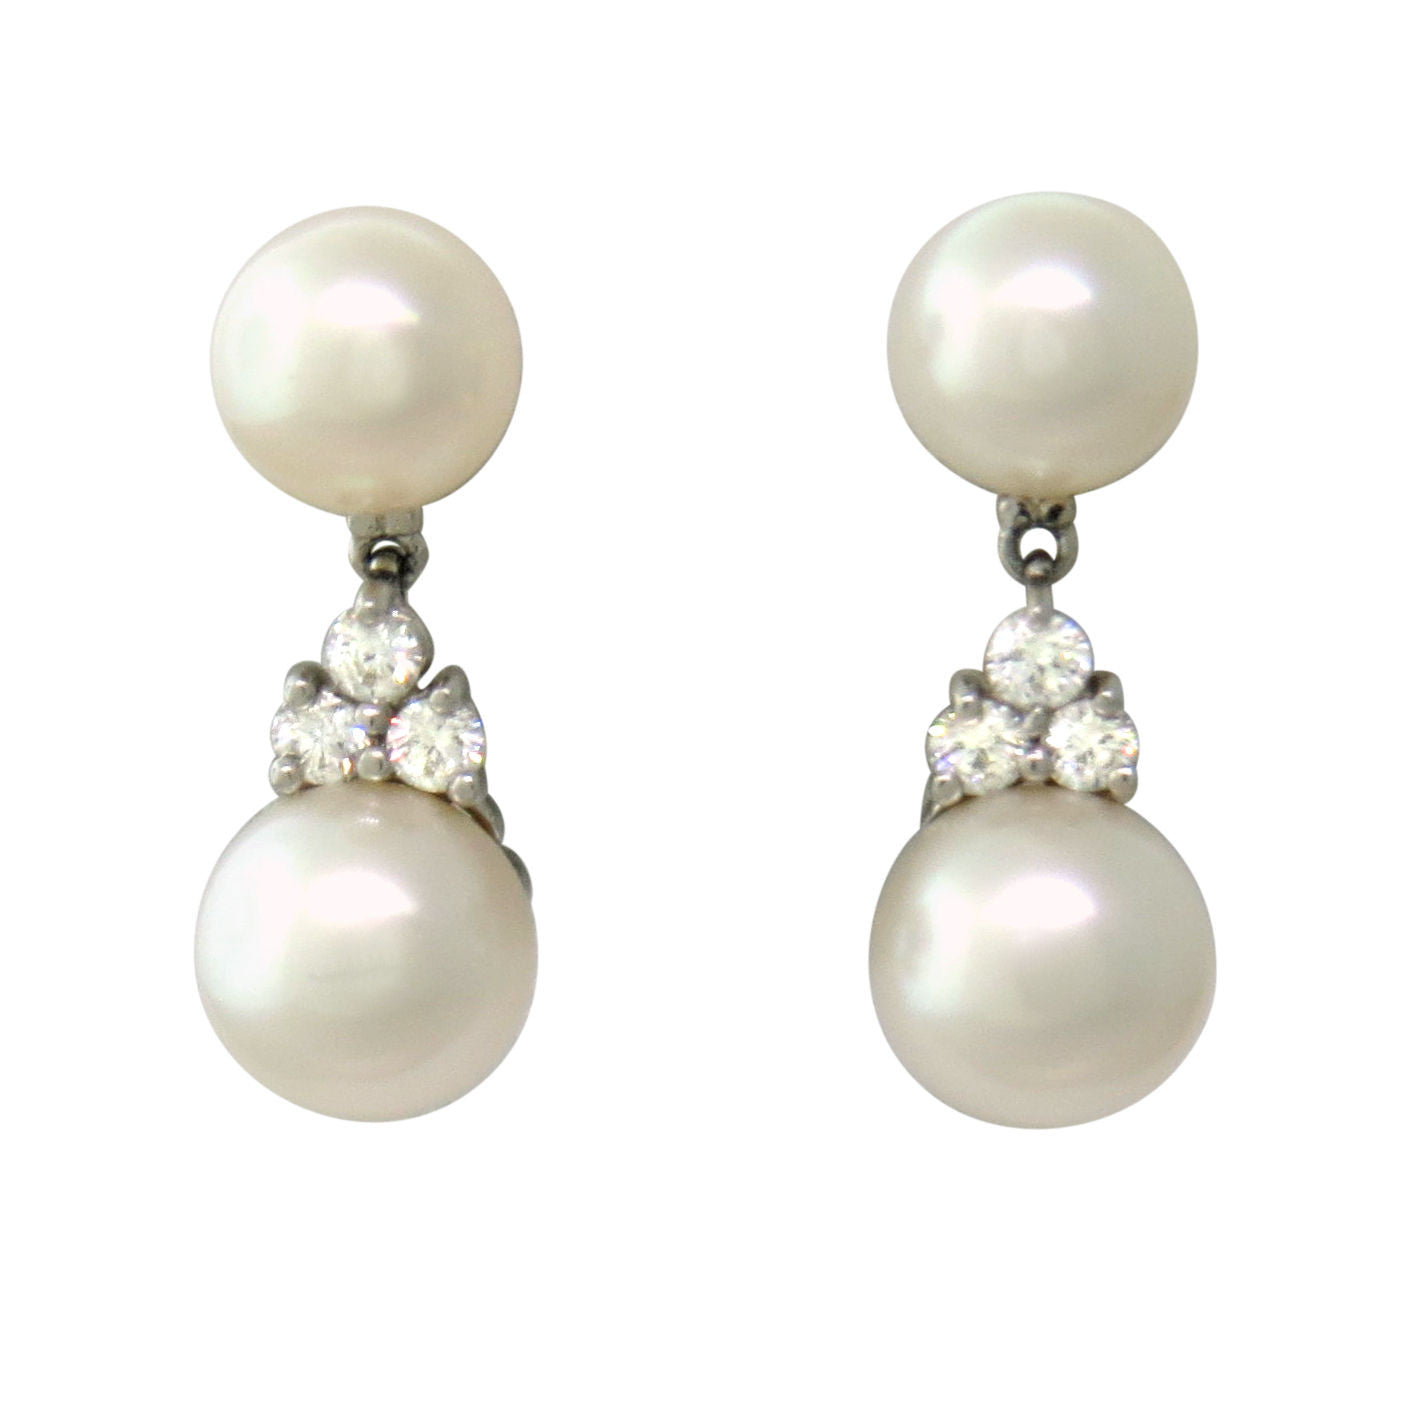 Tiffany & Co Aria Collection Platinum Diamond Pearl Drop Earrings